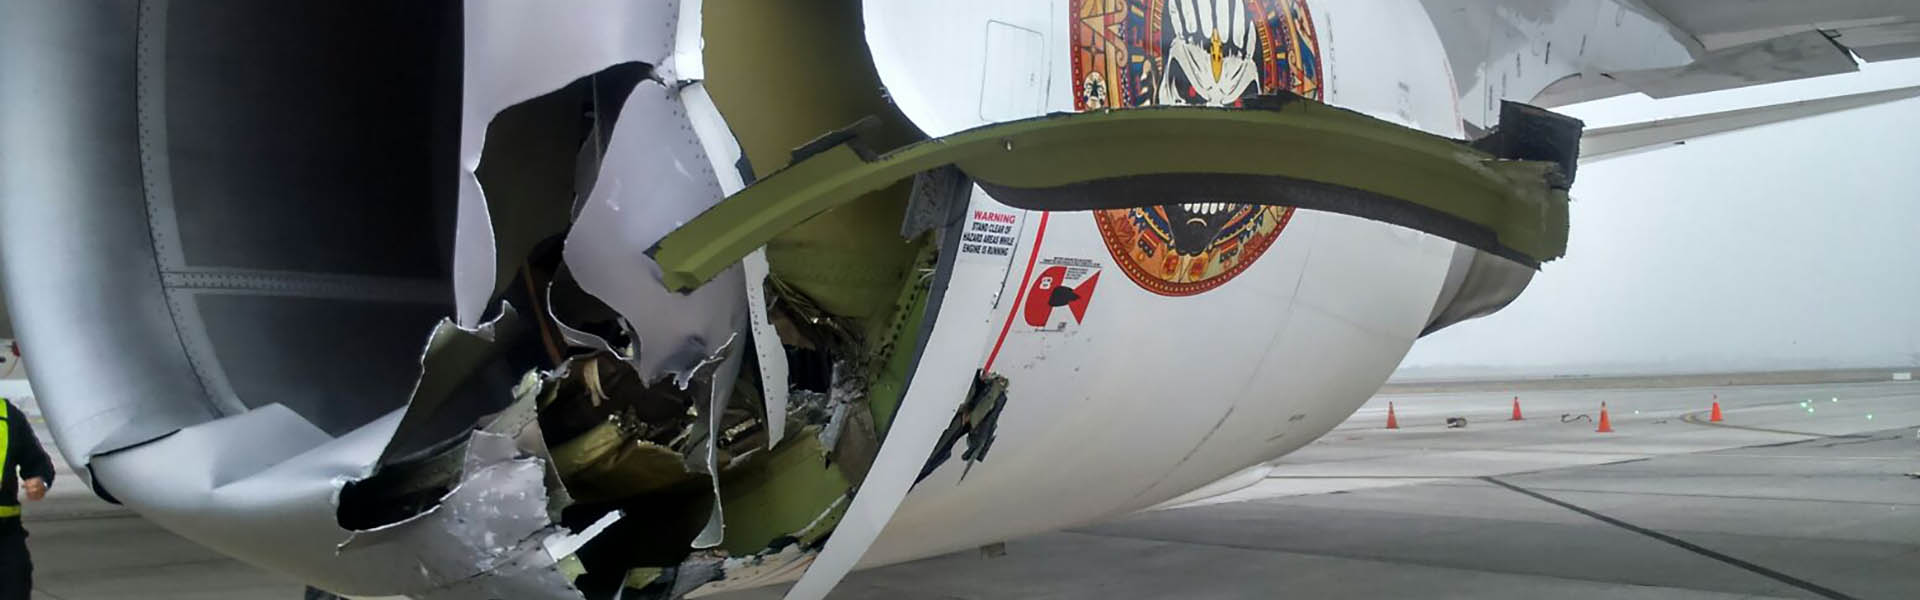 Ed Force One damaged in Chile